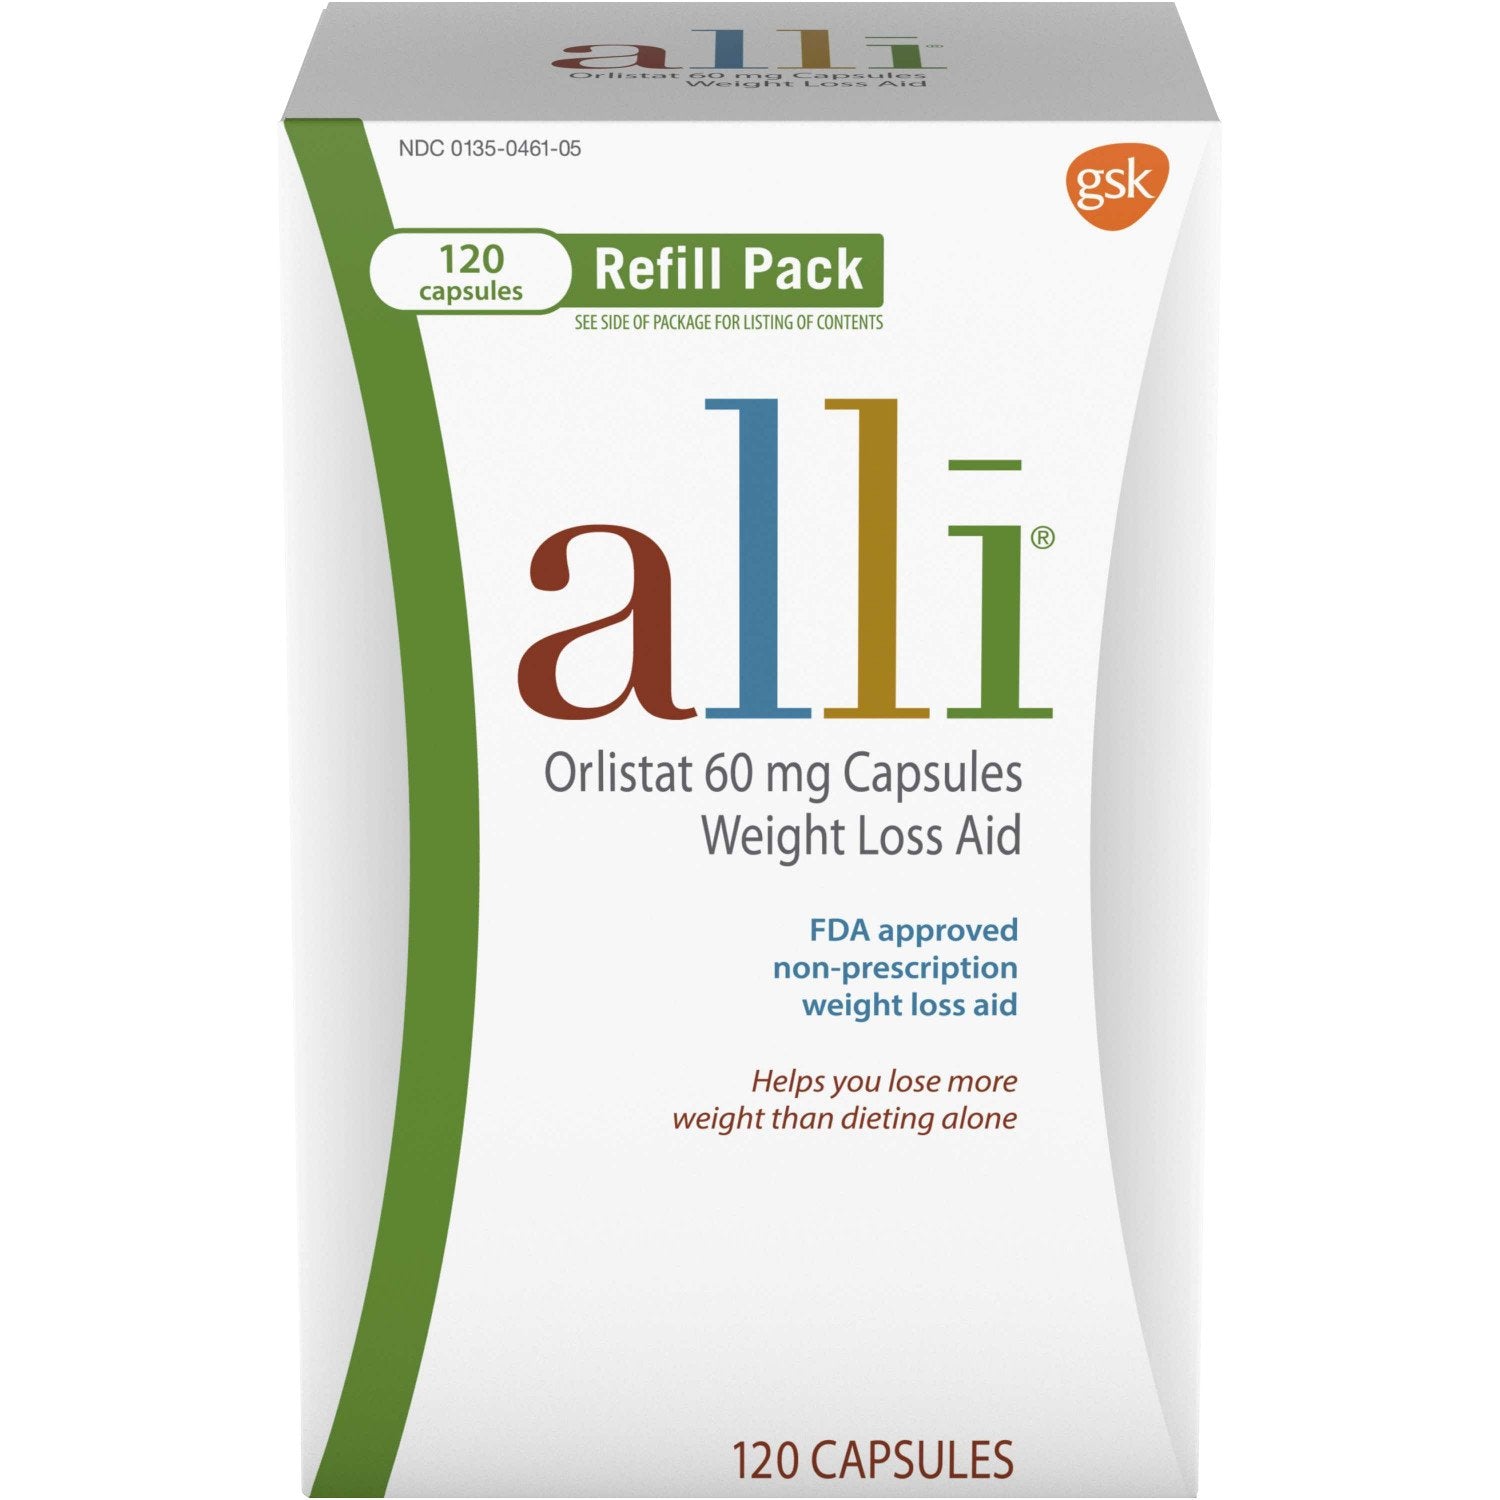 Alli Orlistat 60 mg Capsules Weight Loss Aid Refill Pack - 120ct

